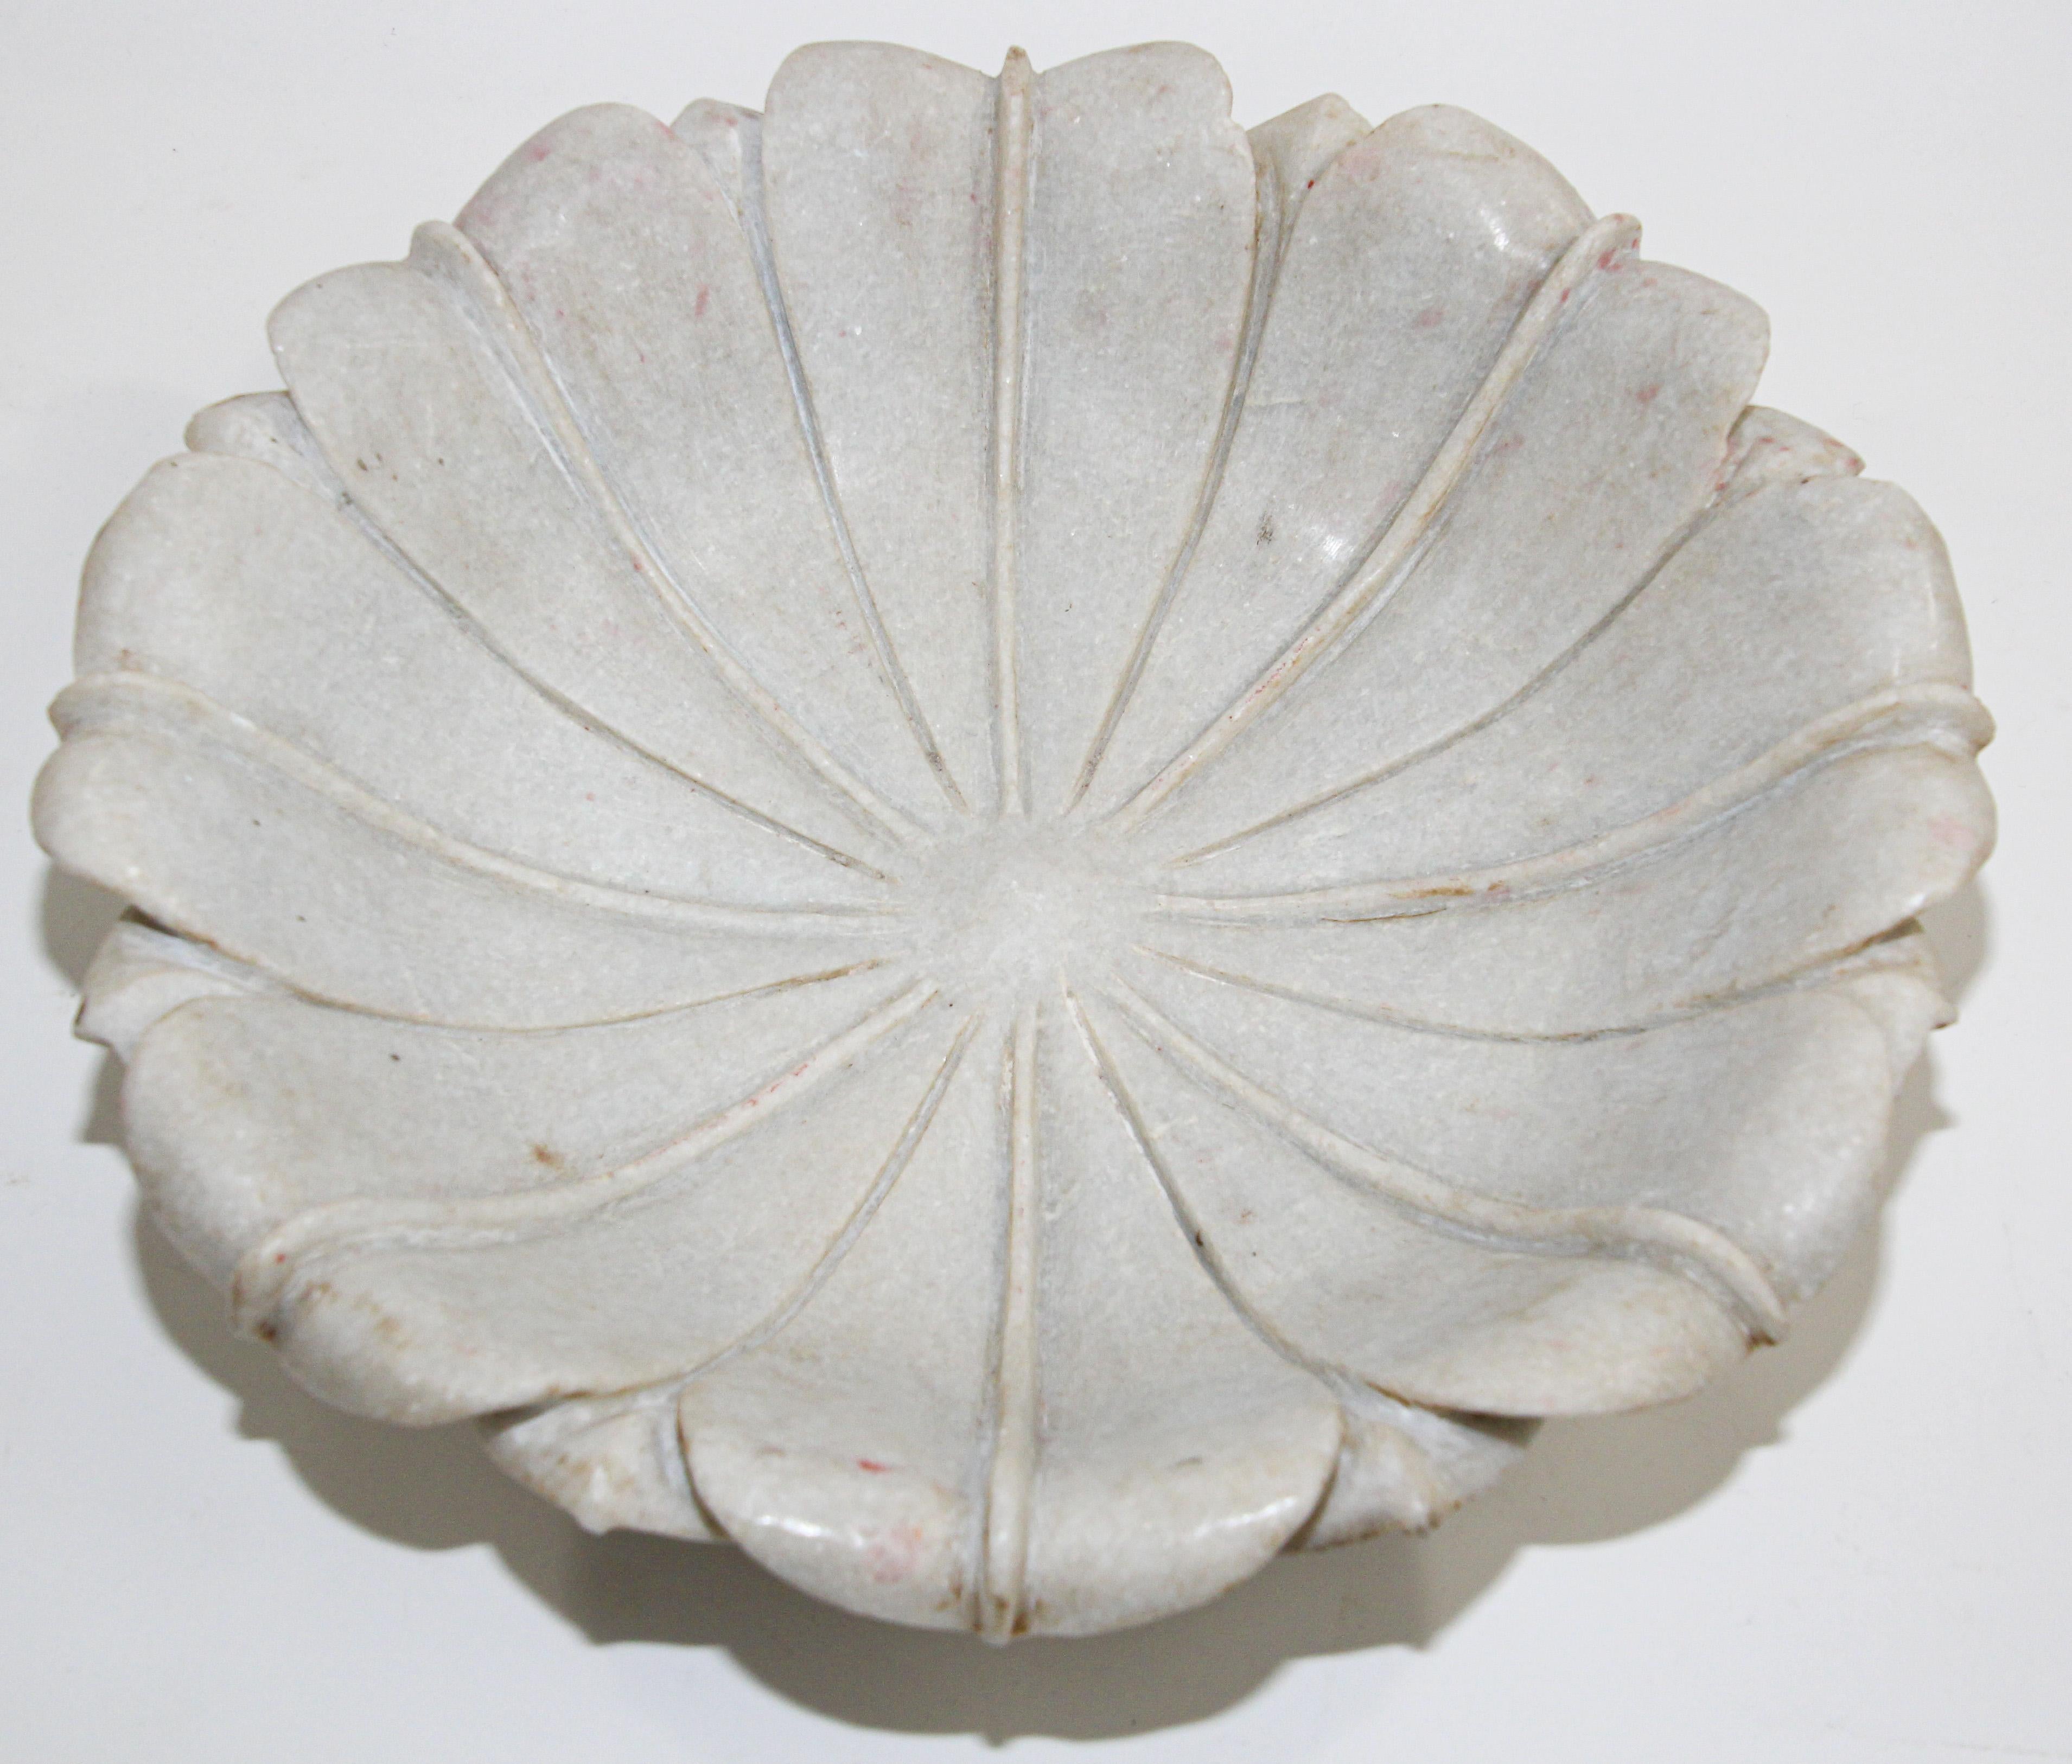 Hand-carved White Marble Flower Lotus Shaped Bowl India 1